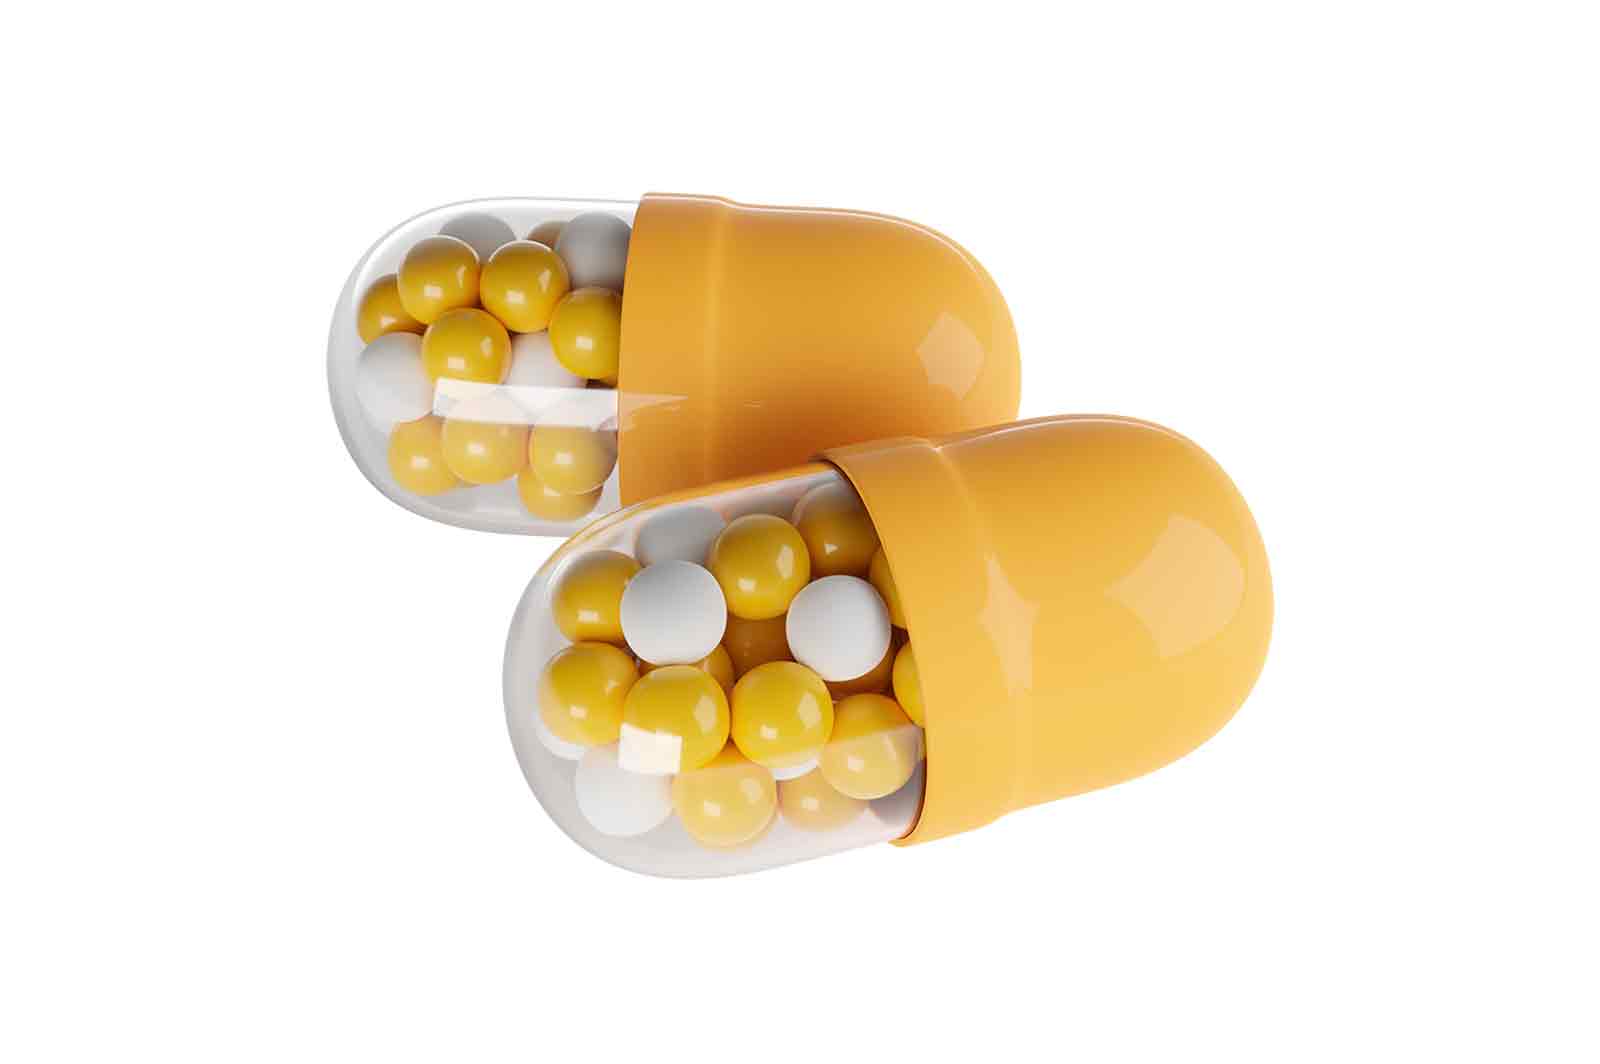 Pills with medicine inside, 3d rendered illustration. Solid dosage forms that contain active ingredients and excipients